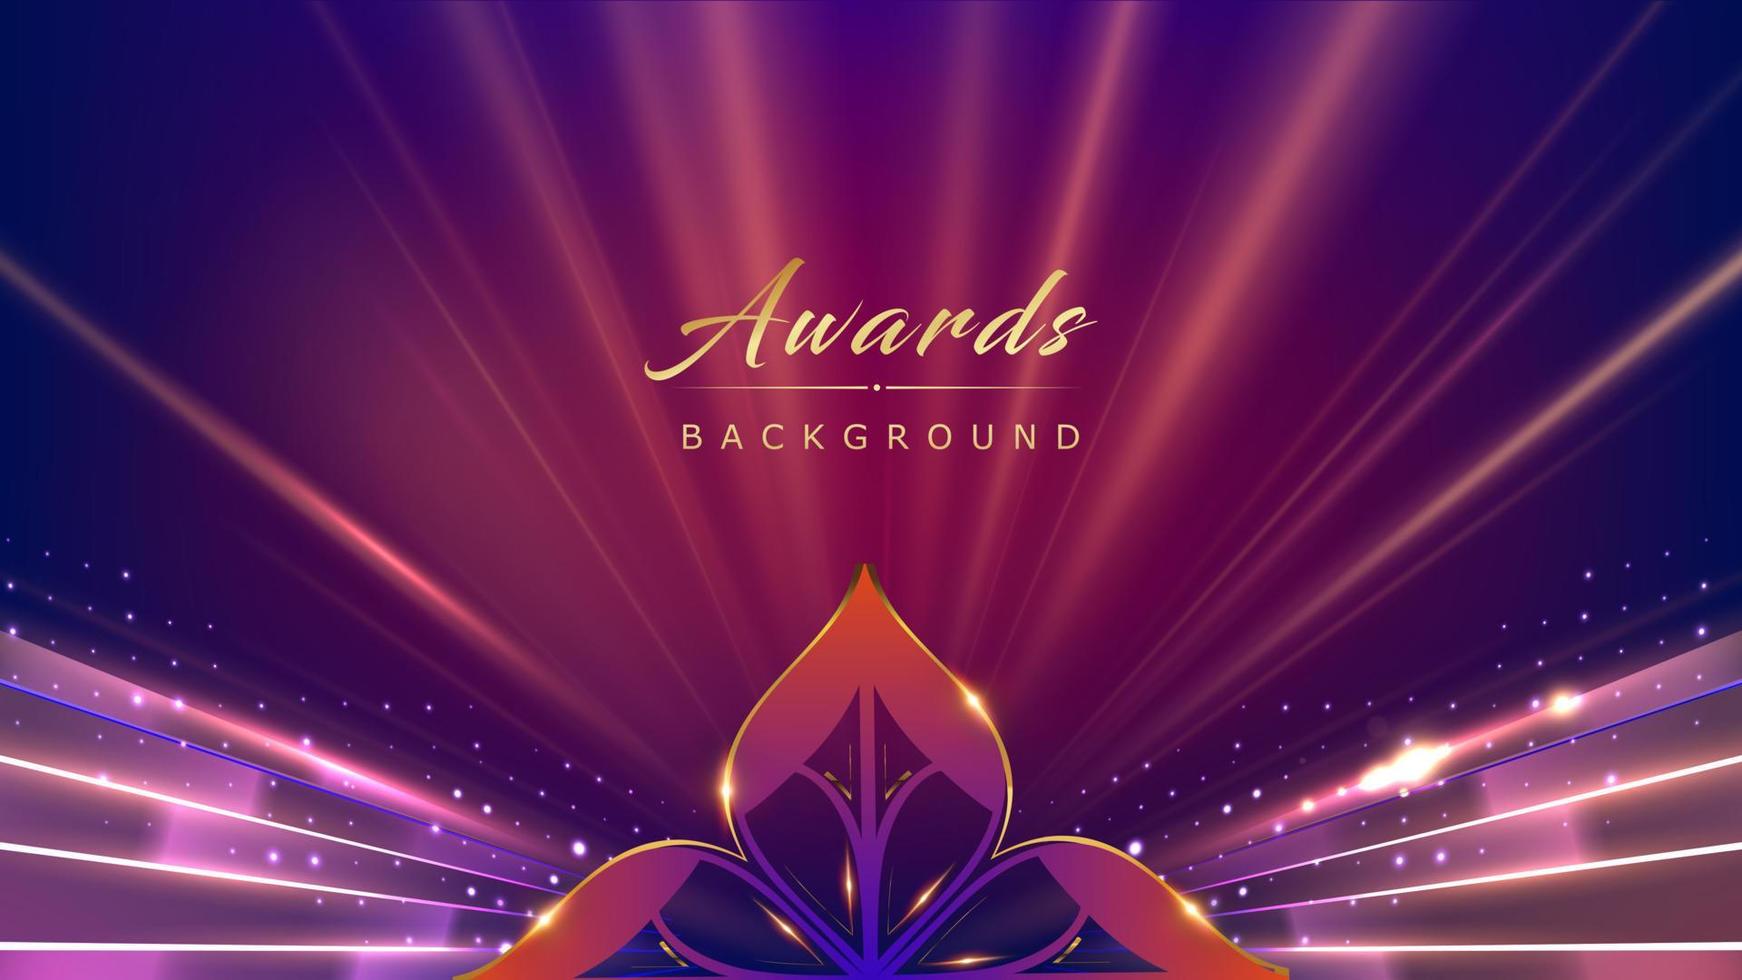 Golden Blue Pink Award Background. Leaf Flower Lotus Traditional Rays Sparkle Glowing Effect. Jubilee Night Decorative Invitation. New Trend Shining Marketing Visual. vector